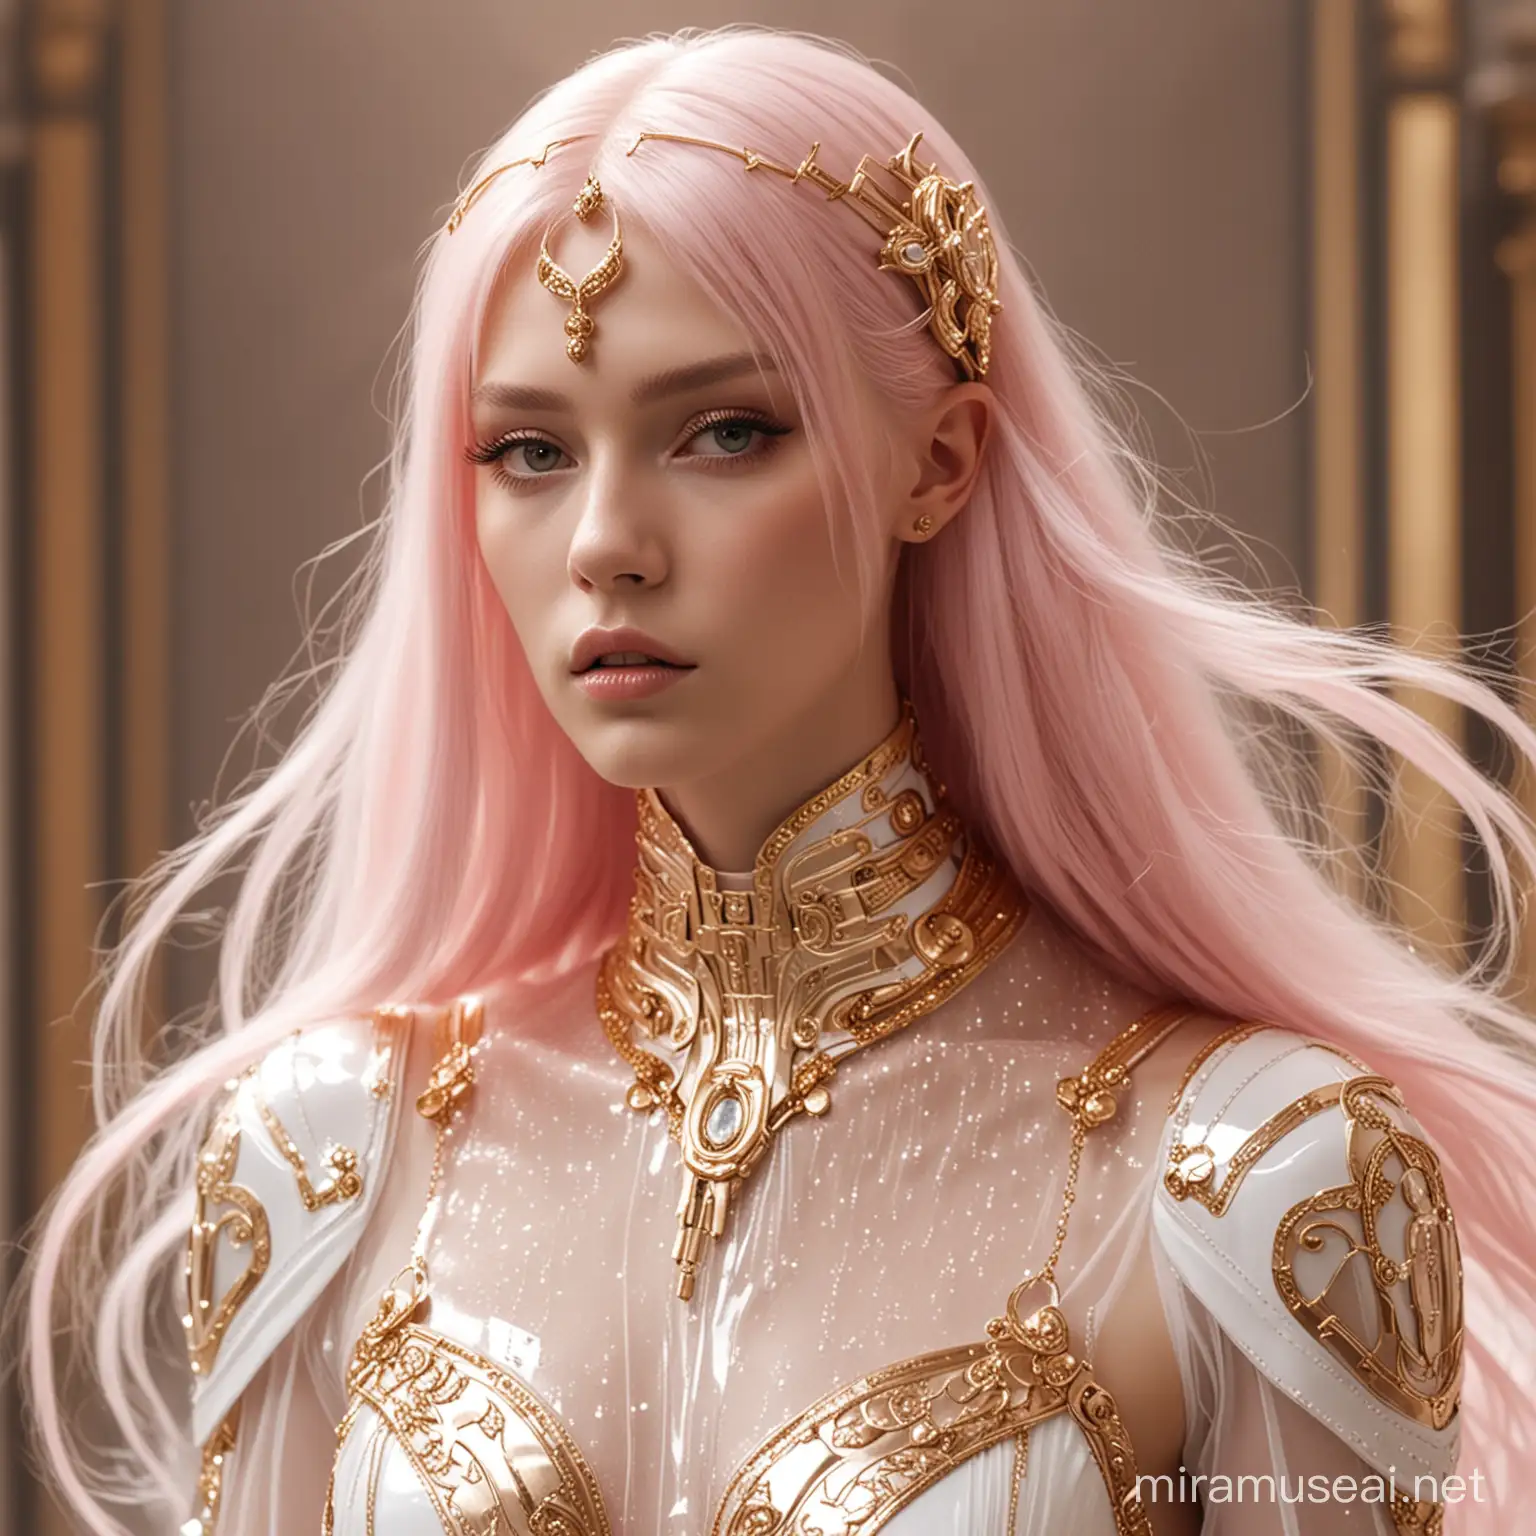 Ethereal Futuristic Goddess in Ornate White and Gold Garb